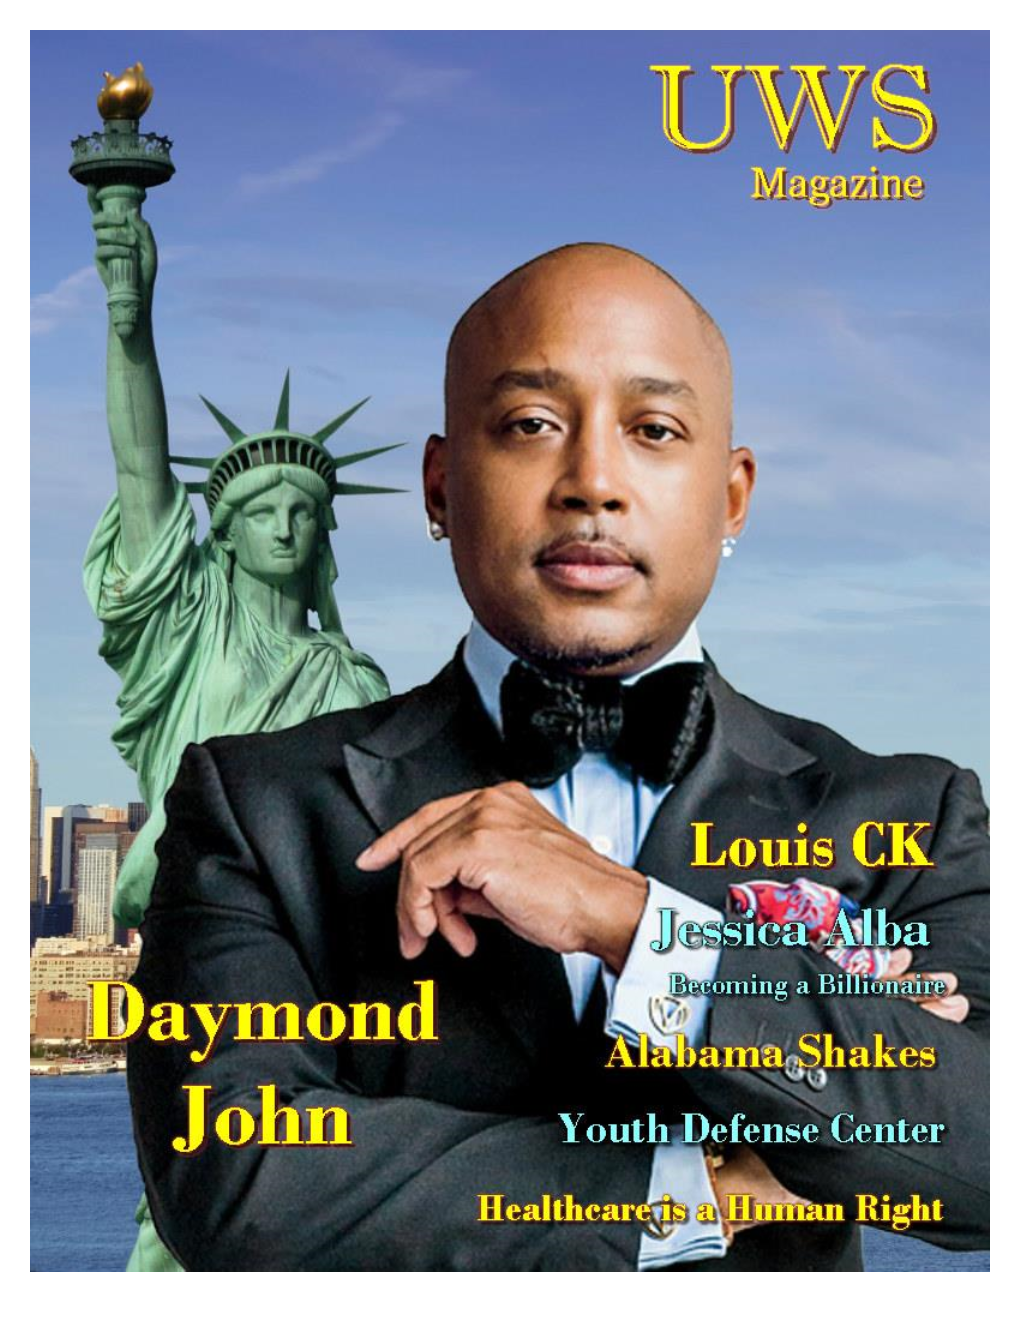 Daymond John Has Come a Long Way from Turning a $40 Budget Into FUBU, a $6 Billion Fashion Game-Changer